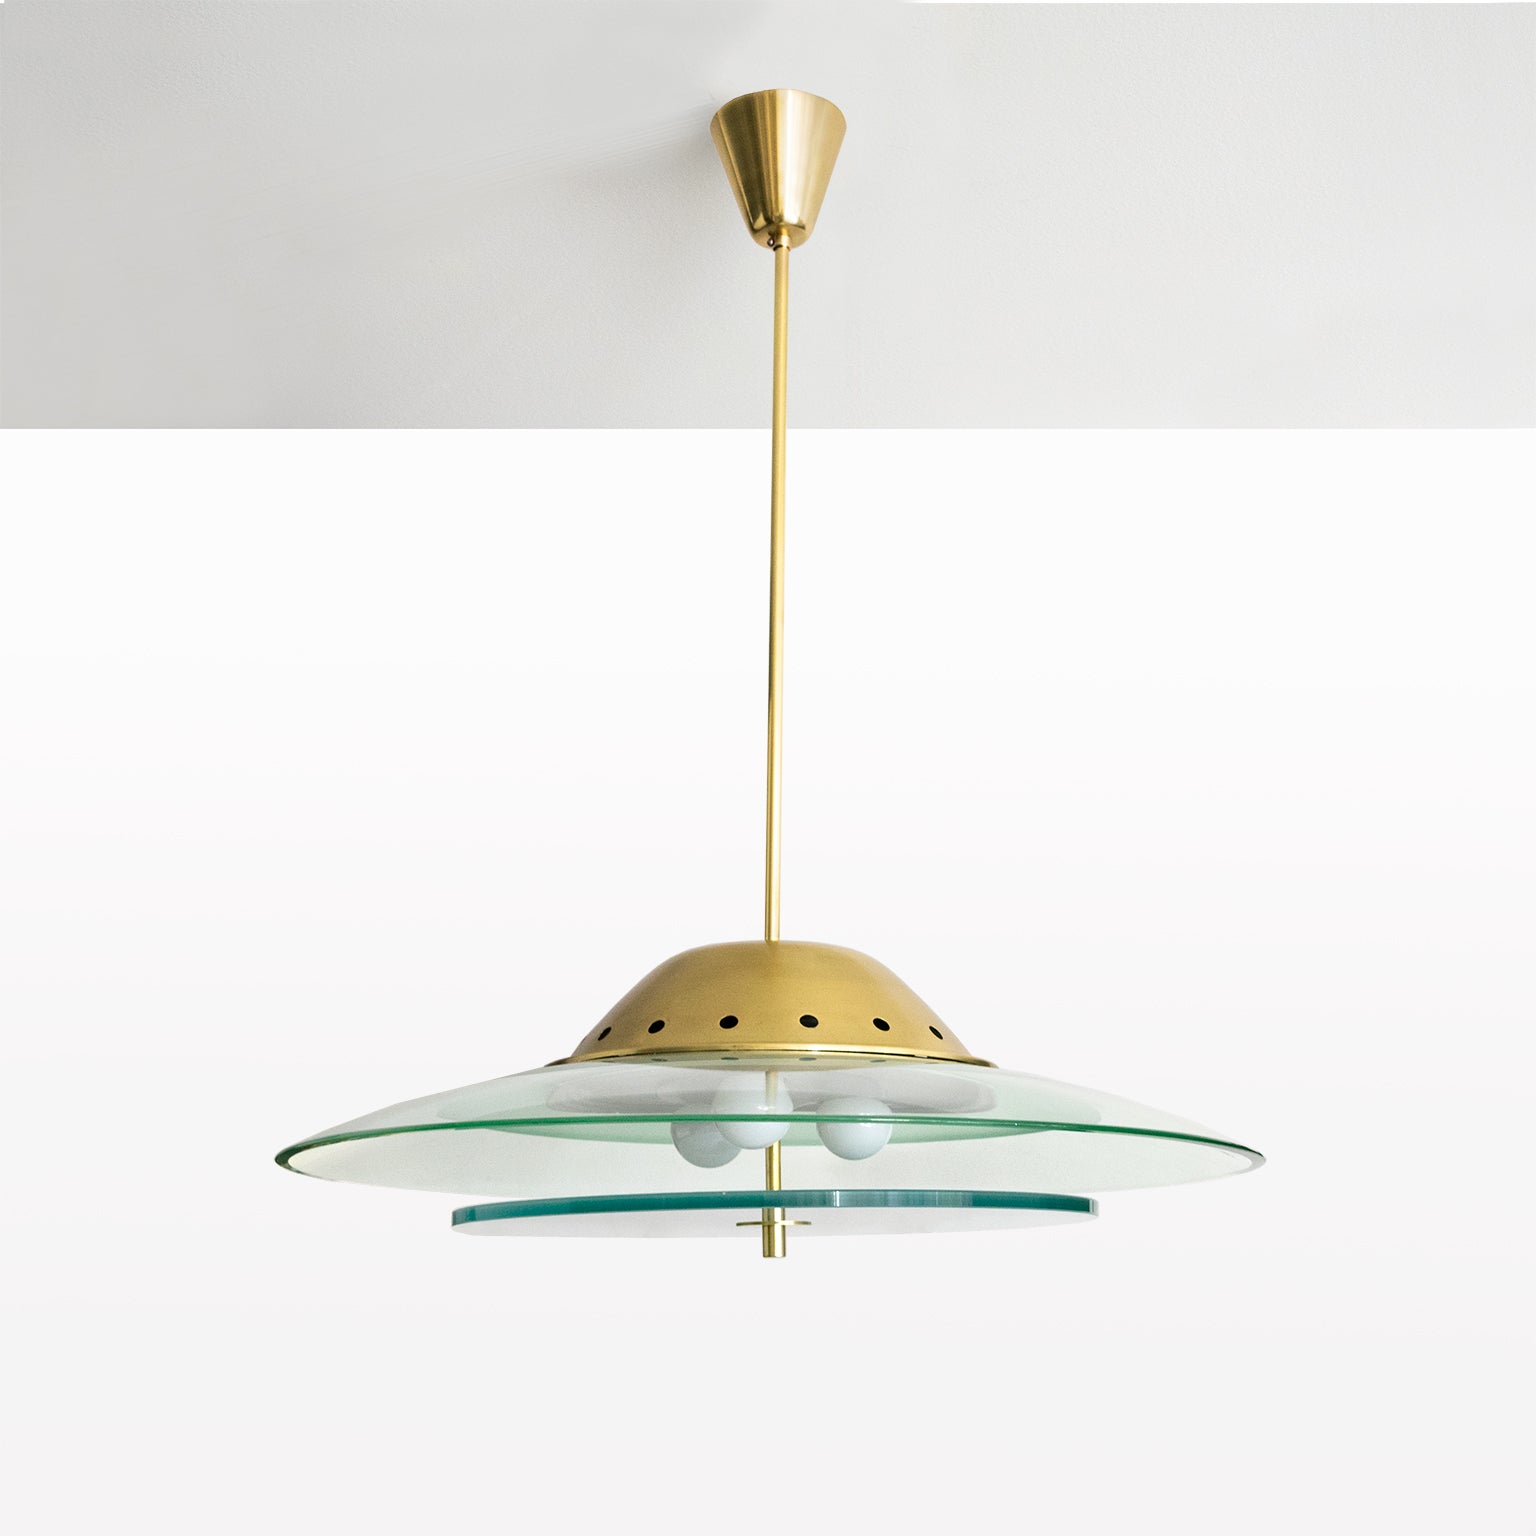 A sleek modernist glass and brass pendant fixture by the brilliant Pietro Chiesa for Fontana Arte, Milano, Italy, circa 1950. Newly rewired with standard base sockets detail with porcelain rings. Newly polished brass and original painted metal